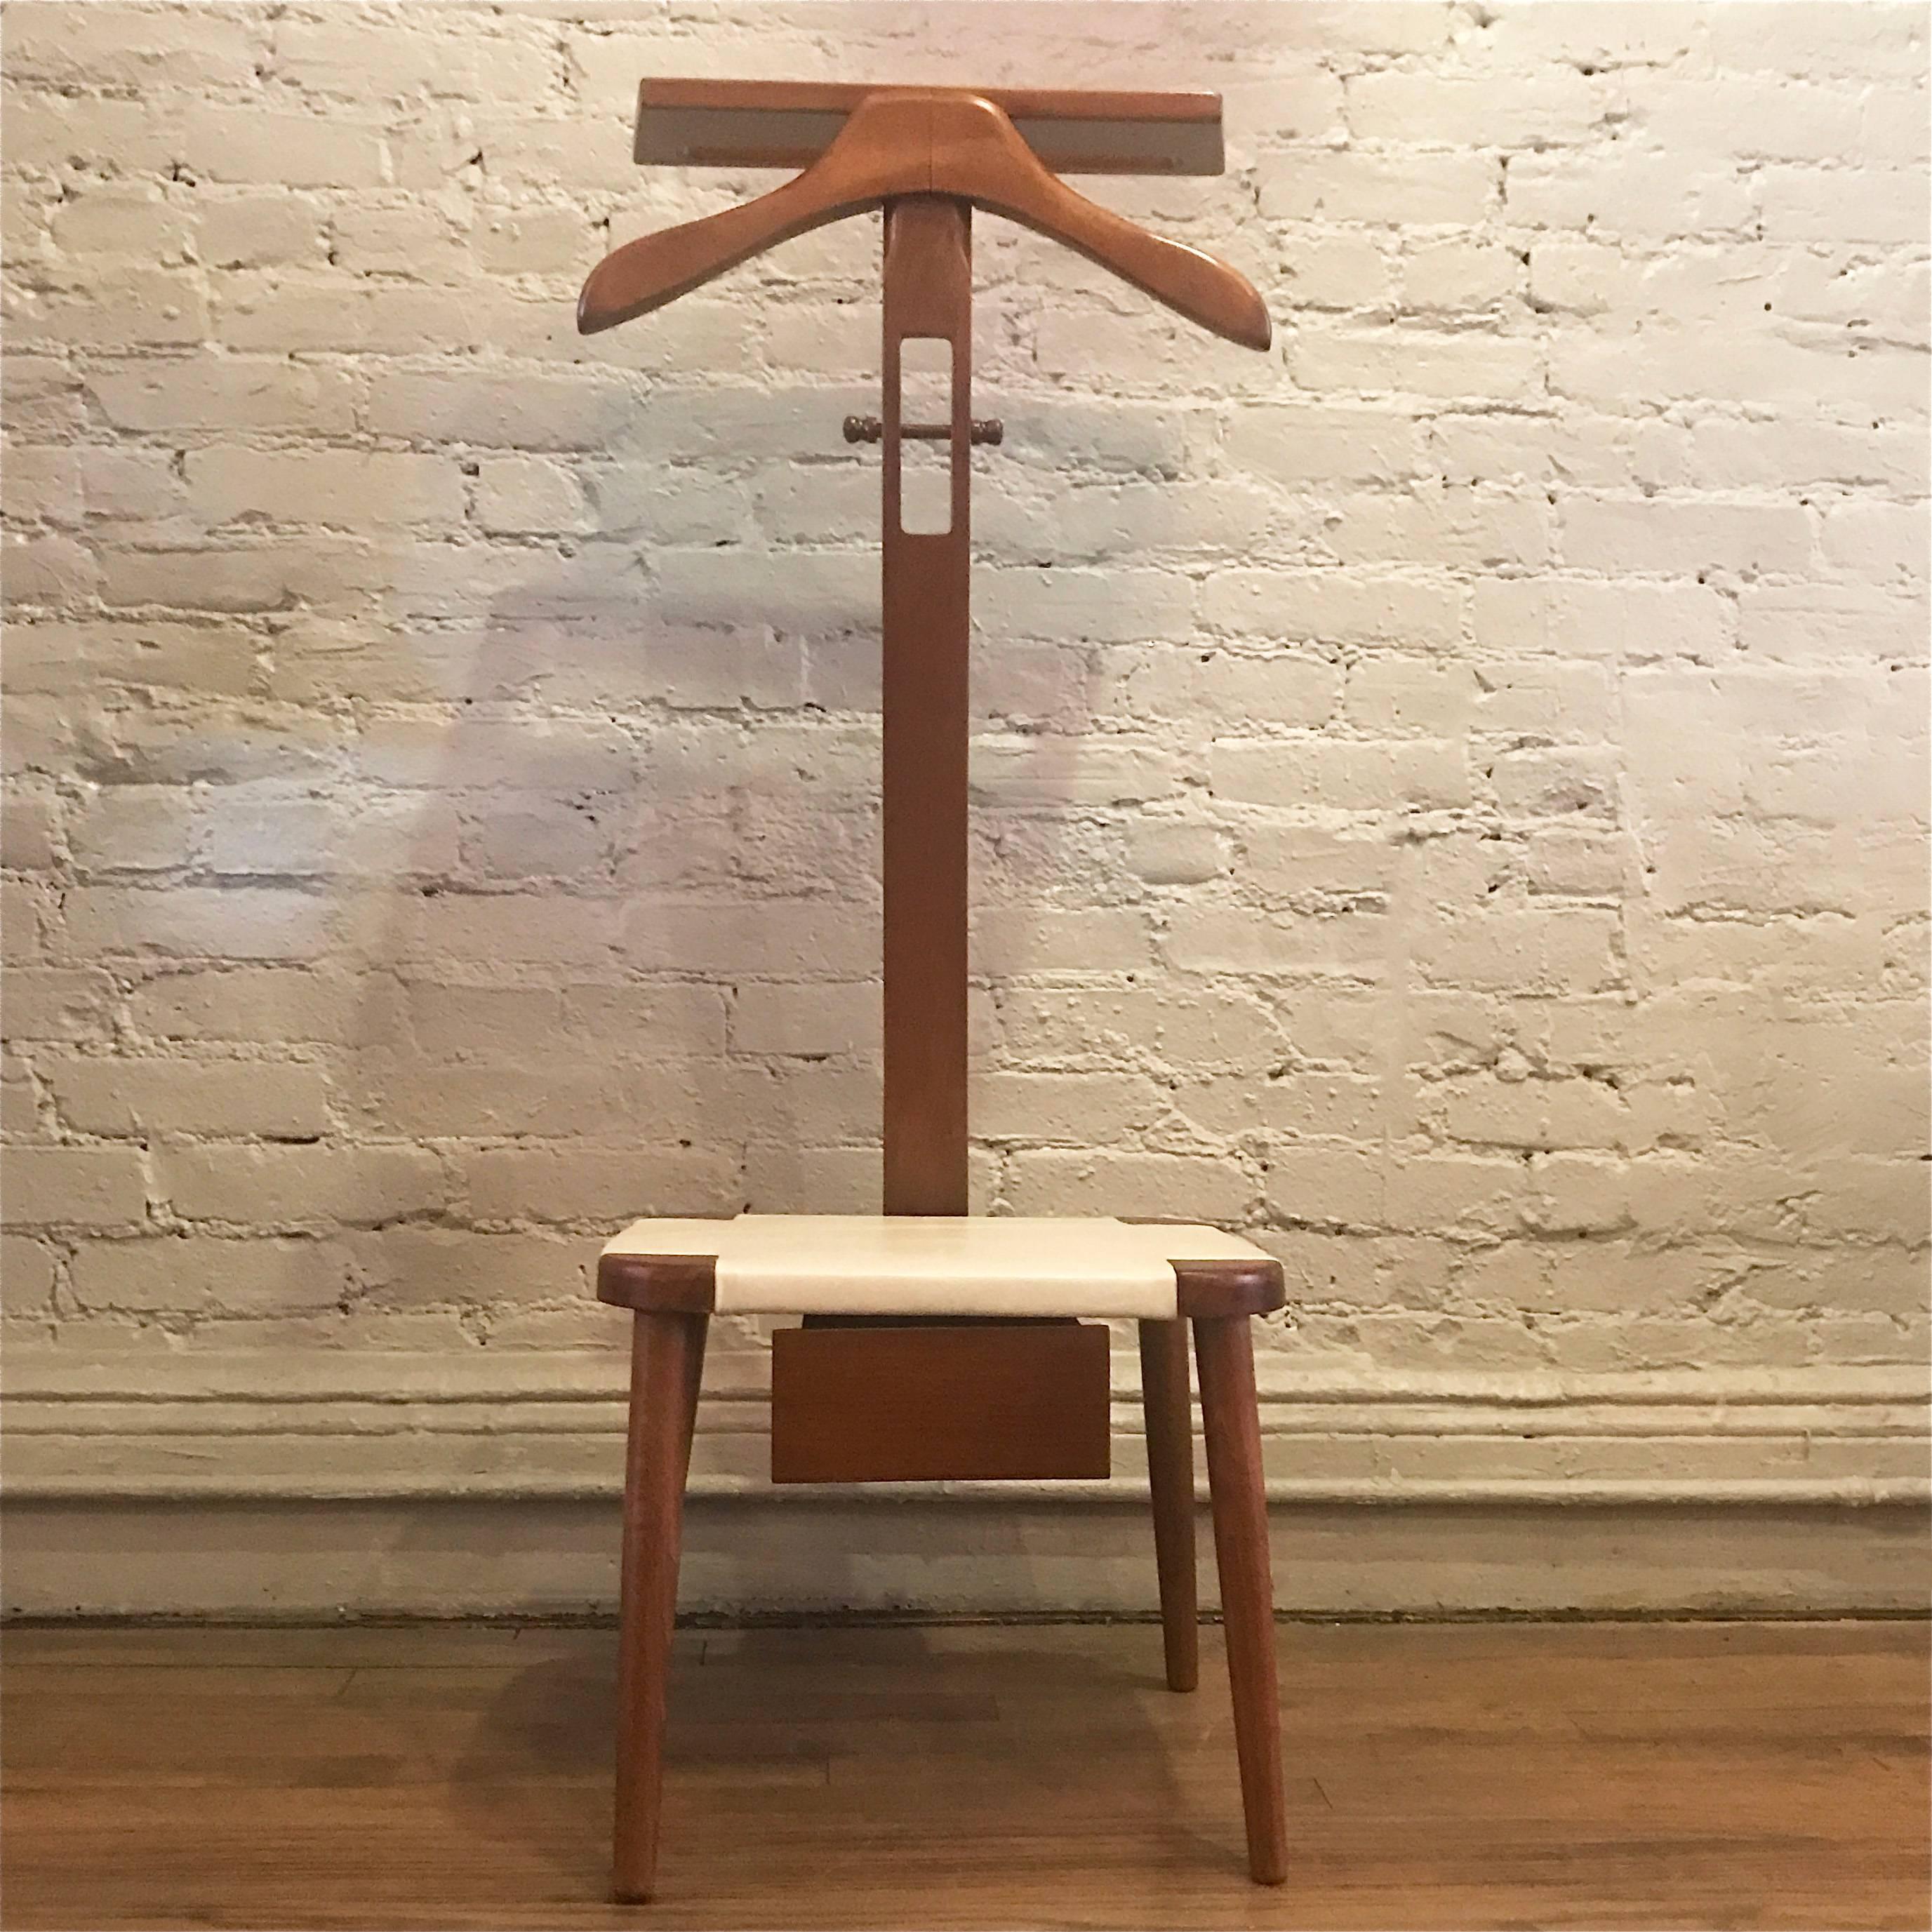 American, Mid-Century Modern, maple, valet chair or butler features a newly upholstered white leather seat and storage drawer below.